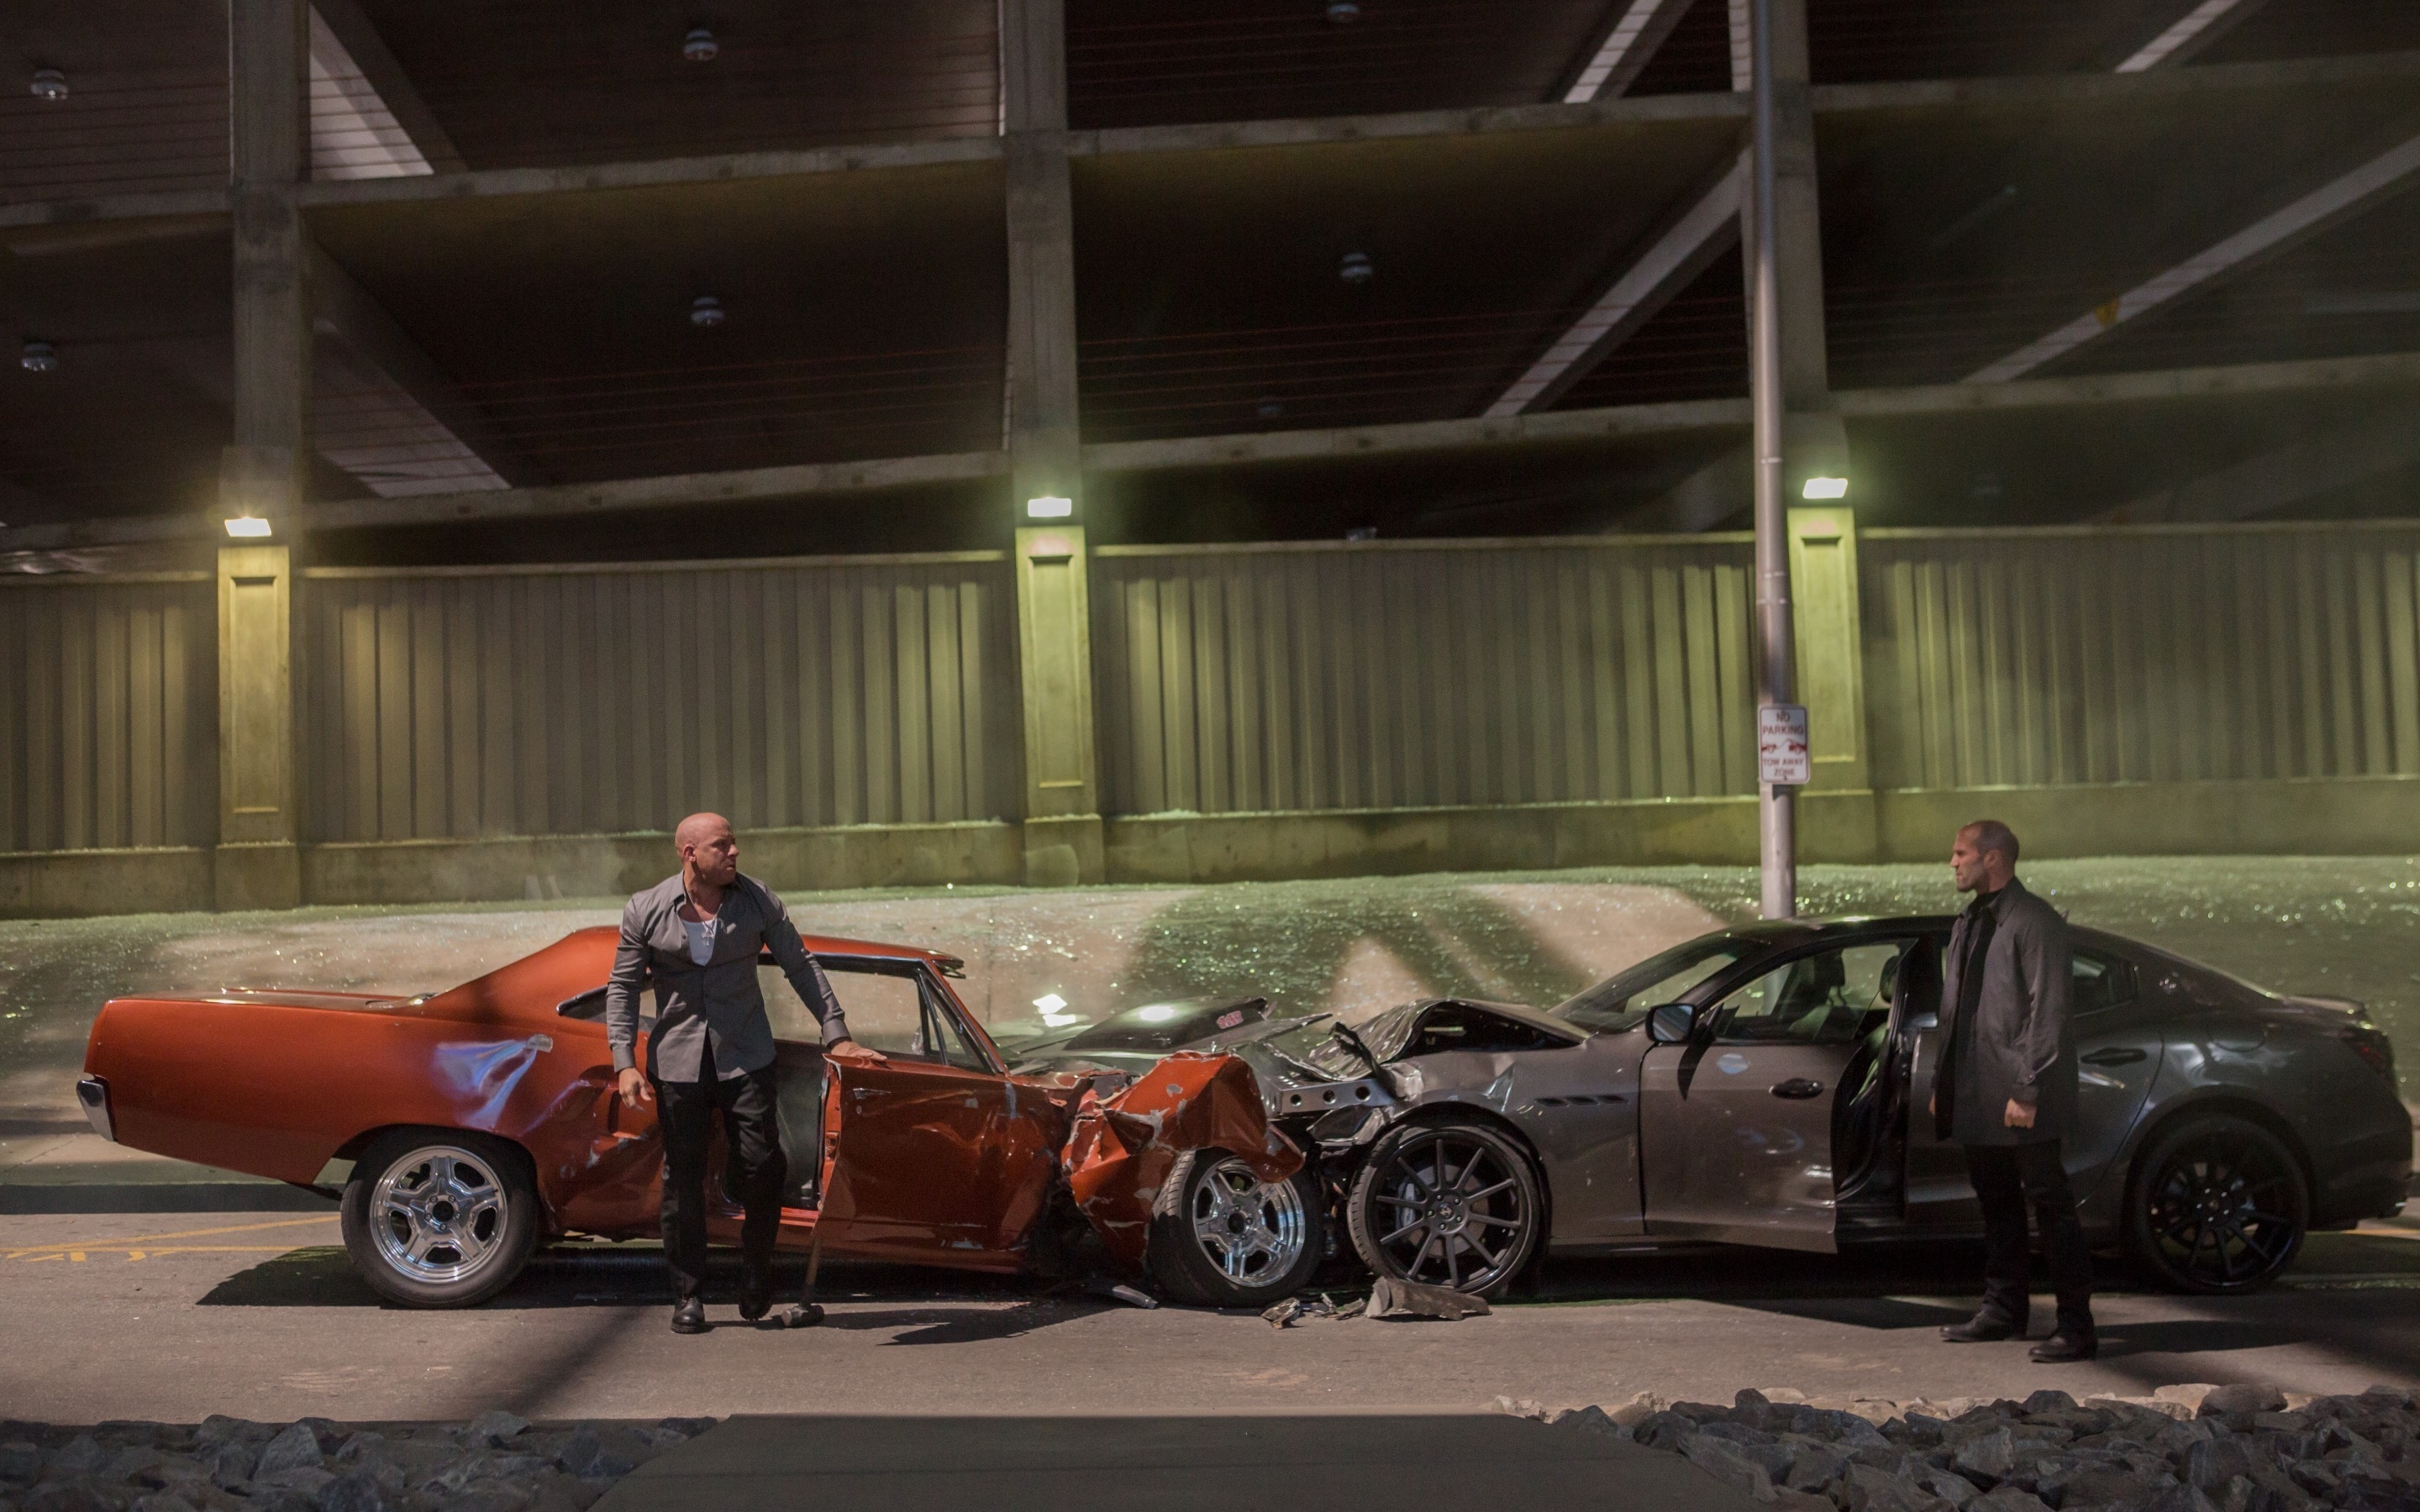 Fast And Furious 7 Movie Scene for 2880 x 1800 Retina Display resolution